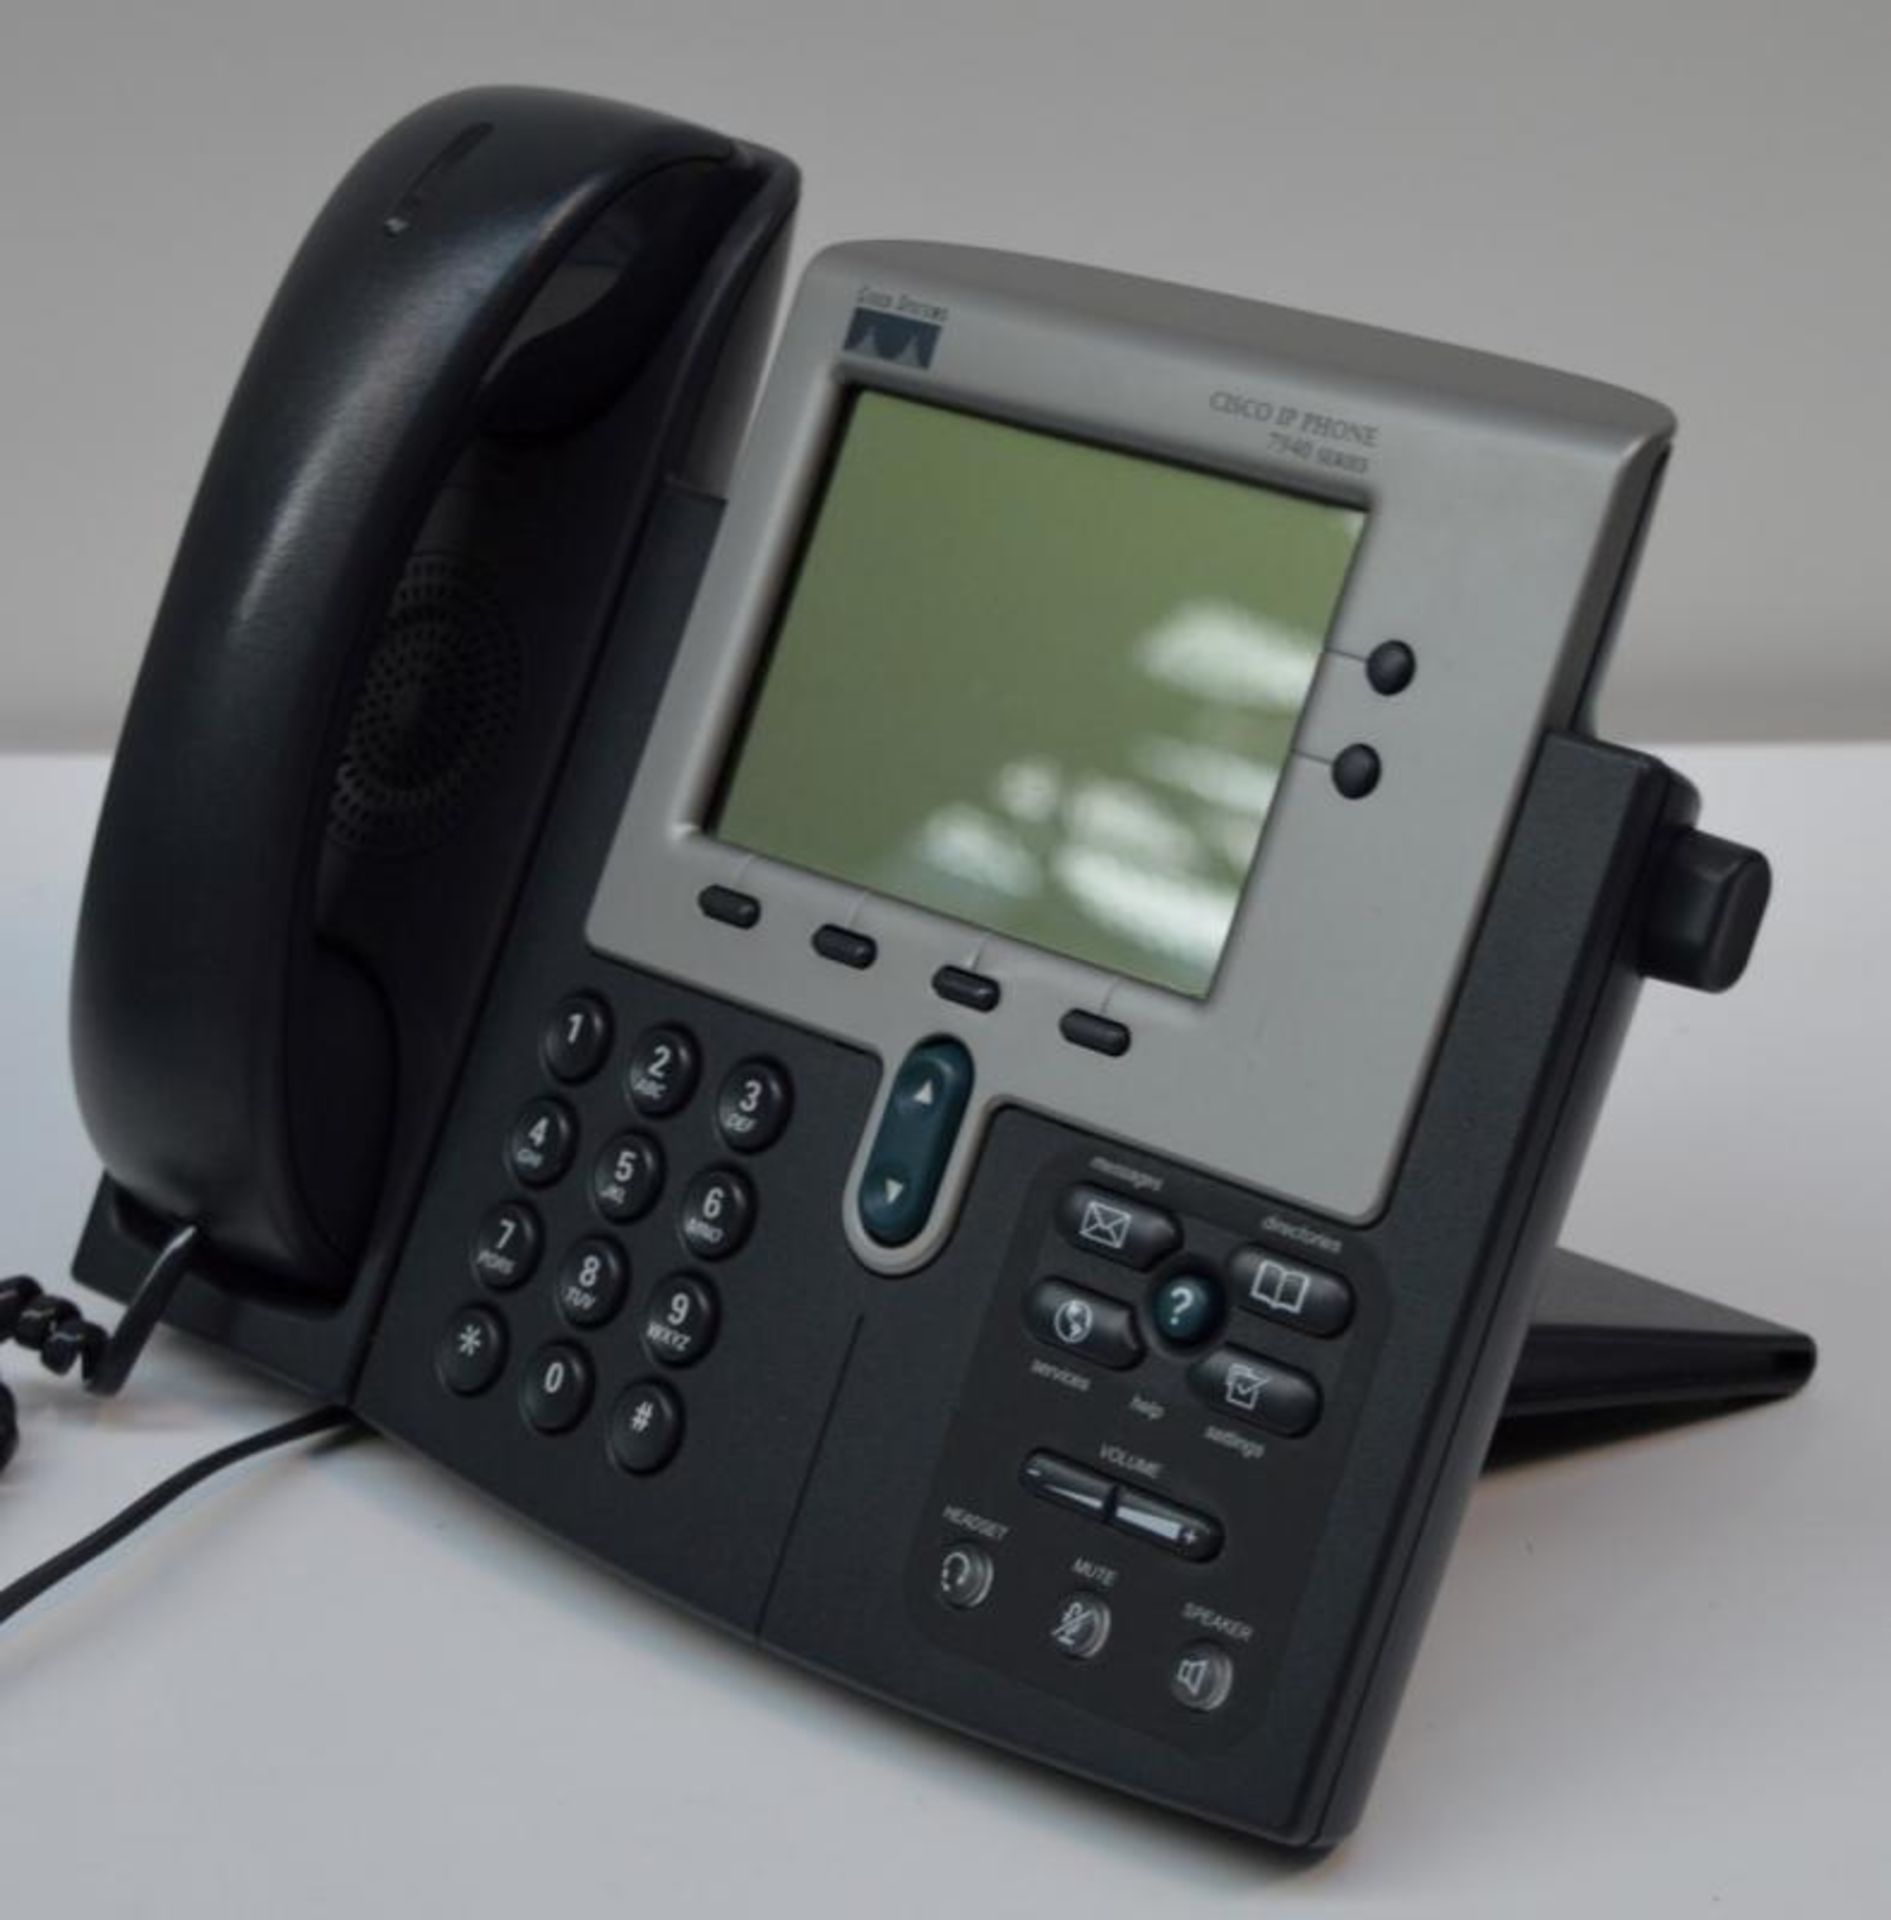 4 x Cisco CP-7940G IP Phone VOIP Telephone LCD Display Phones - Removed From a Working Office Enviro - Image 5 of 6